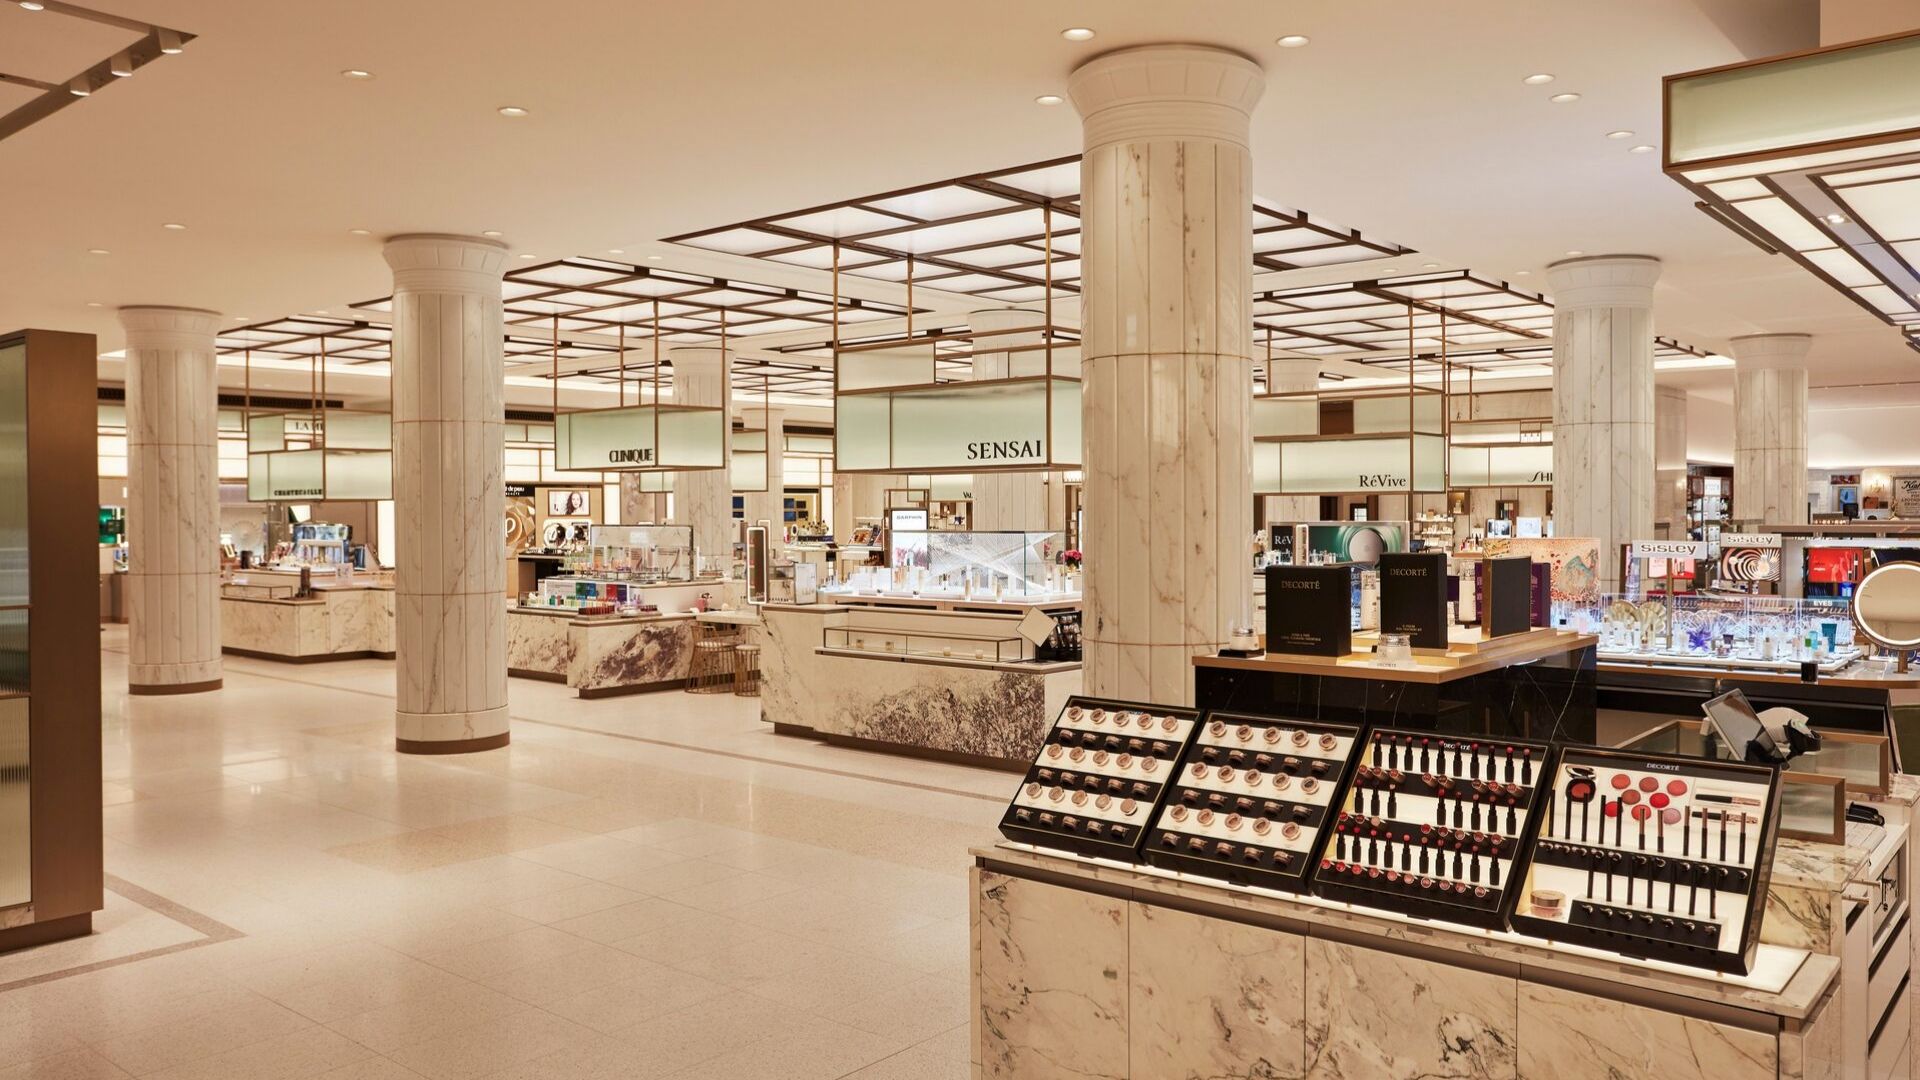 A JOURNEY OF EMOTIONS AT HARRODS PERFUMERY HALL - News